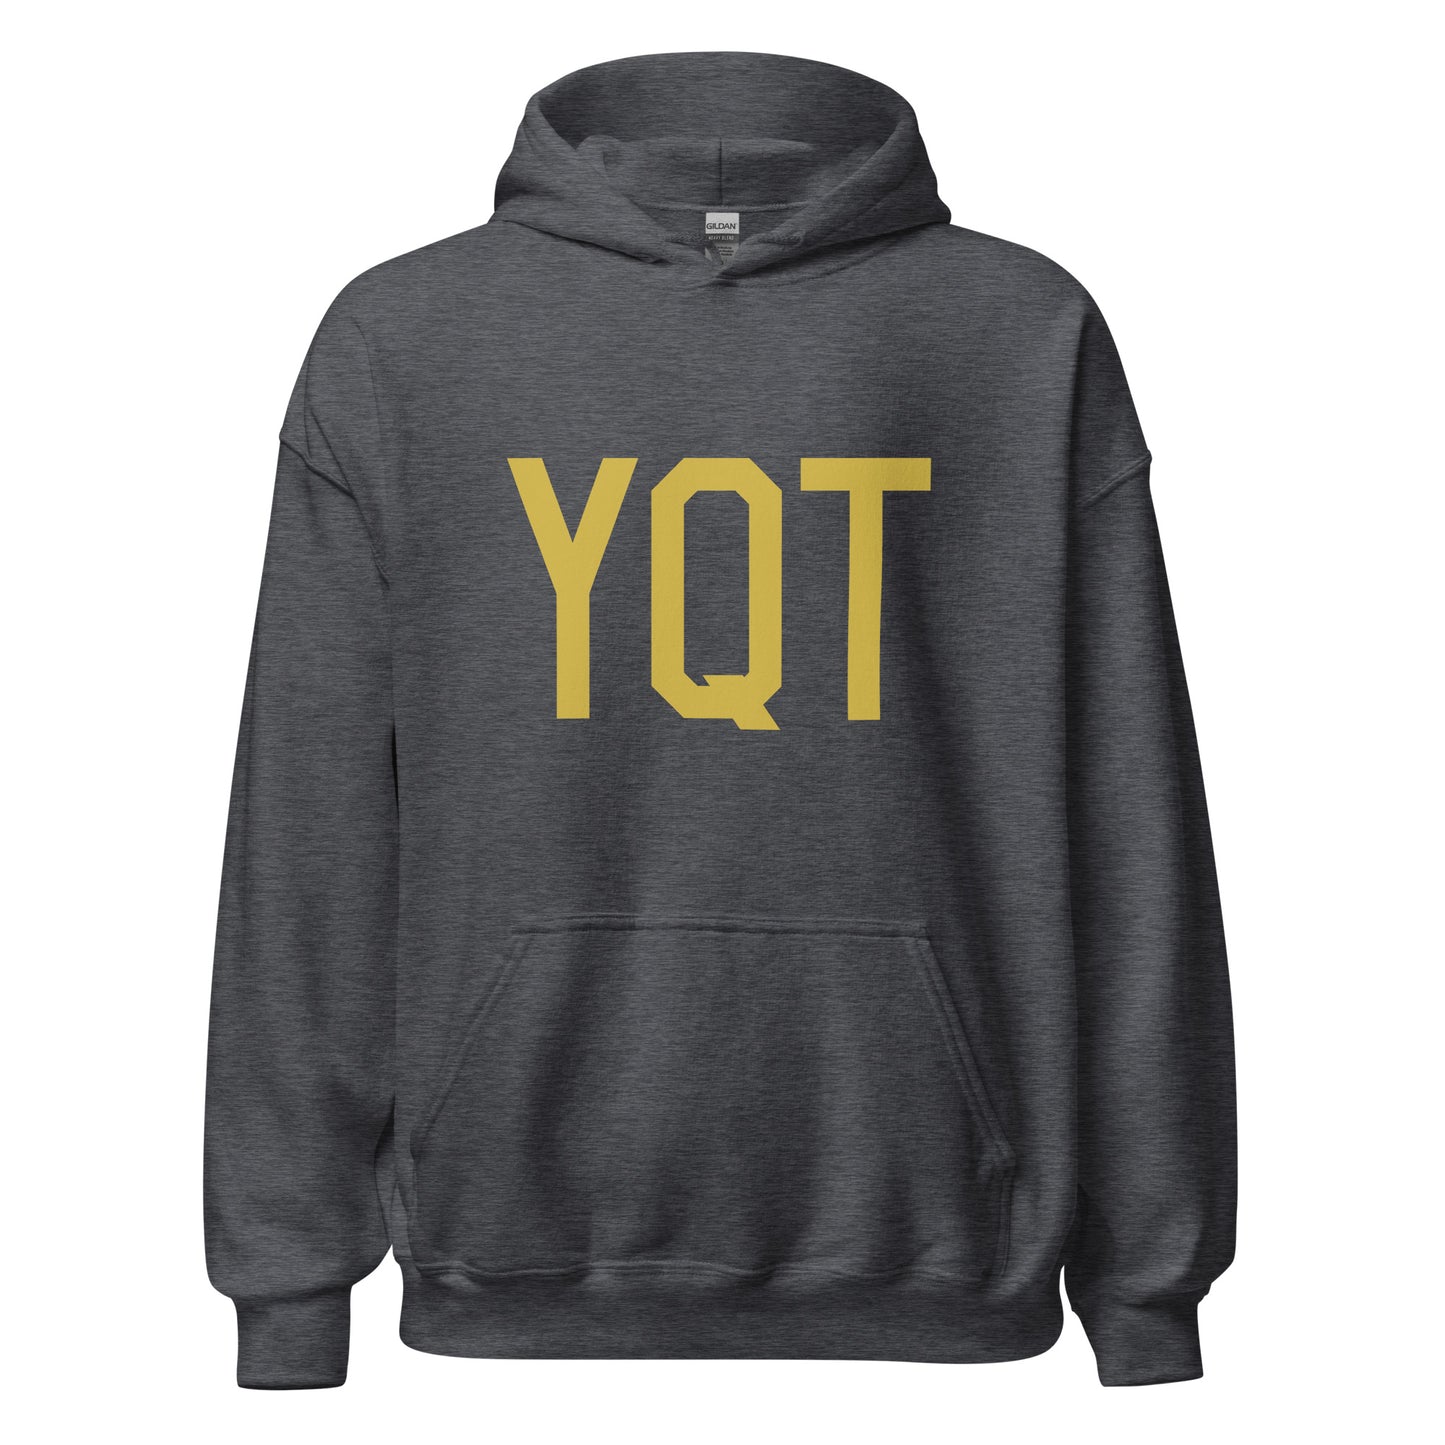 Aviation Gift Unisex Hoodie - Old Gold Graphic • YQT Thunder Bay • YHM Designs - Image 03